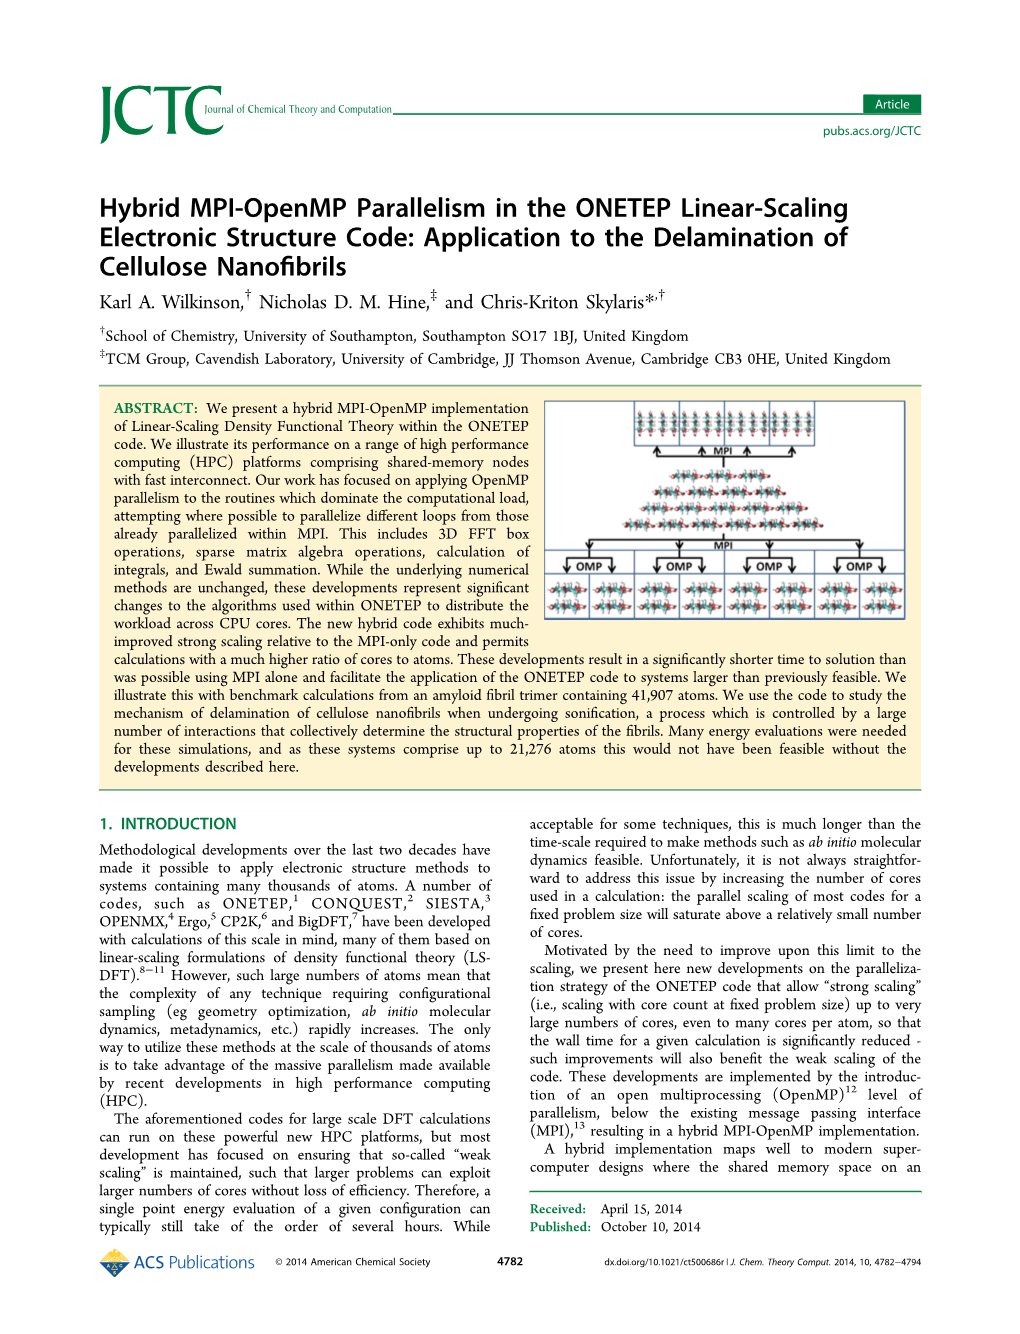 Hybrid MPI-Openmp Parallelism in the ONETEP Linear-Scaling Electronic Structure Code: Application to the Delamination of Cellulose Nanoﬁbrils Karl A